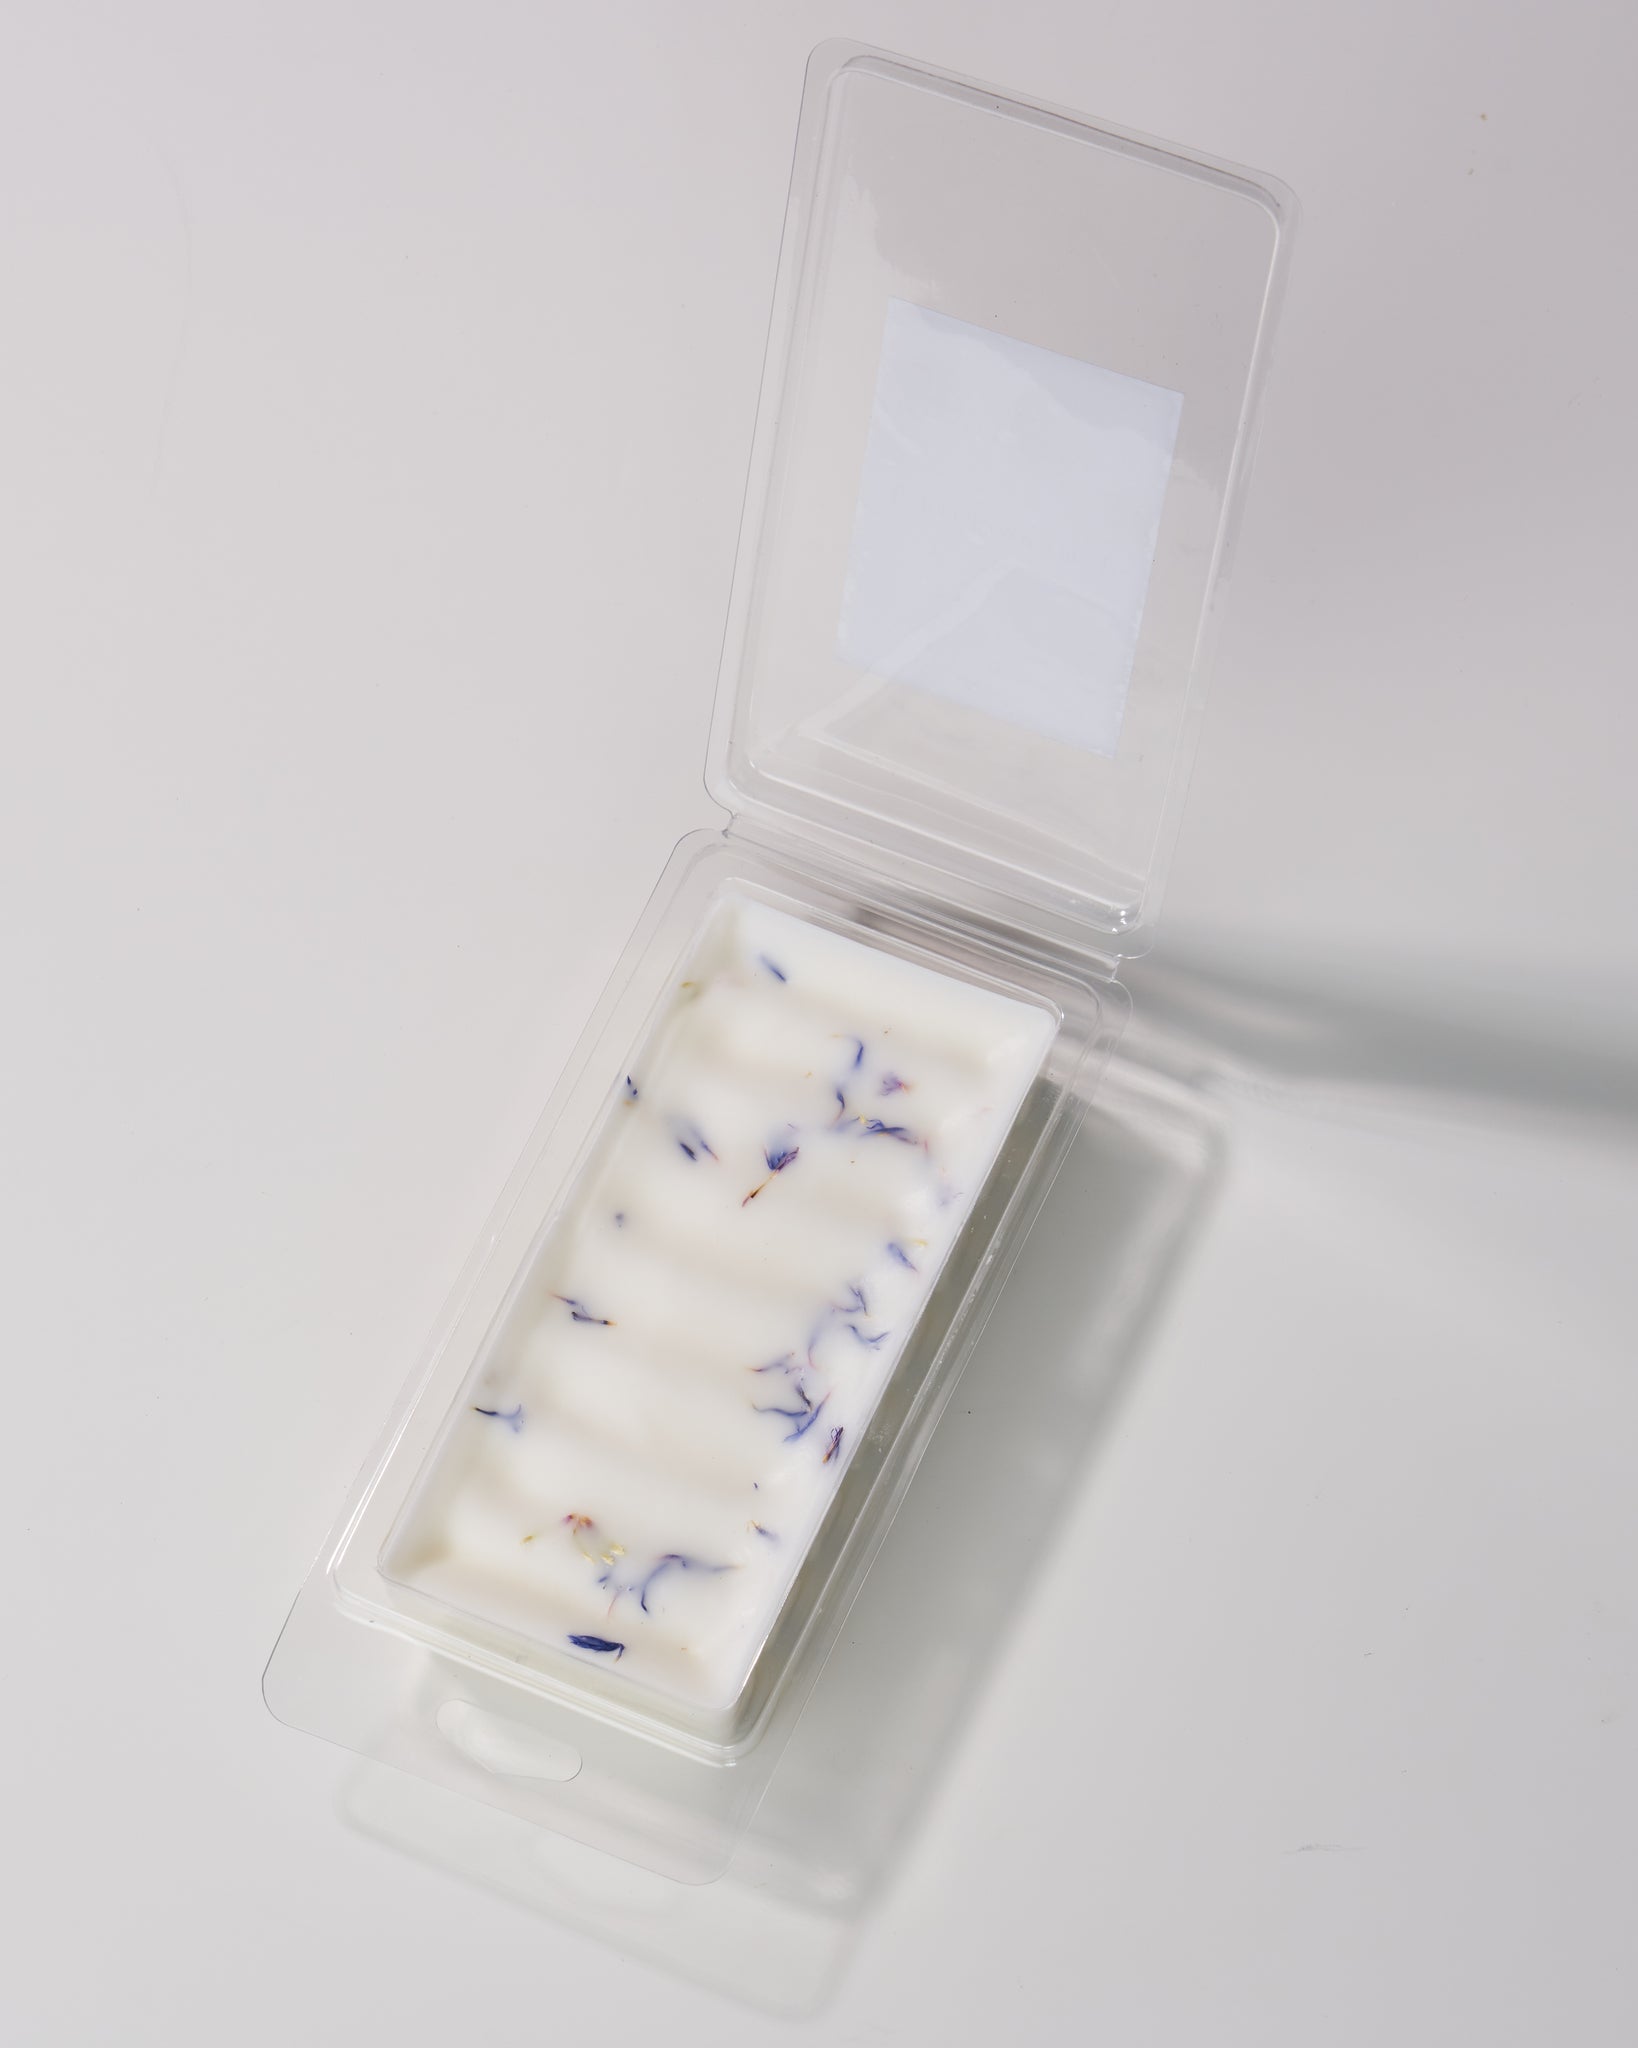 Luxurious coconut and soy wax melts in Moonchild scent - a delightful blend of grapefruit, acai berry, galbanum, peach, jasmine, musk, and vanilla balsam. Infused with natural cornflowers for a touch of the mystical and third eye healing.